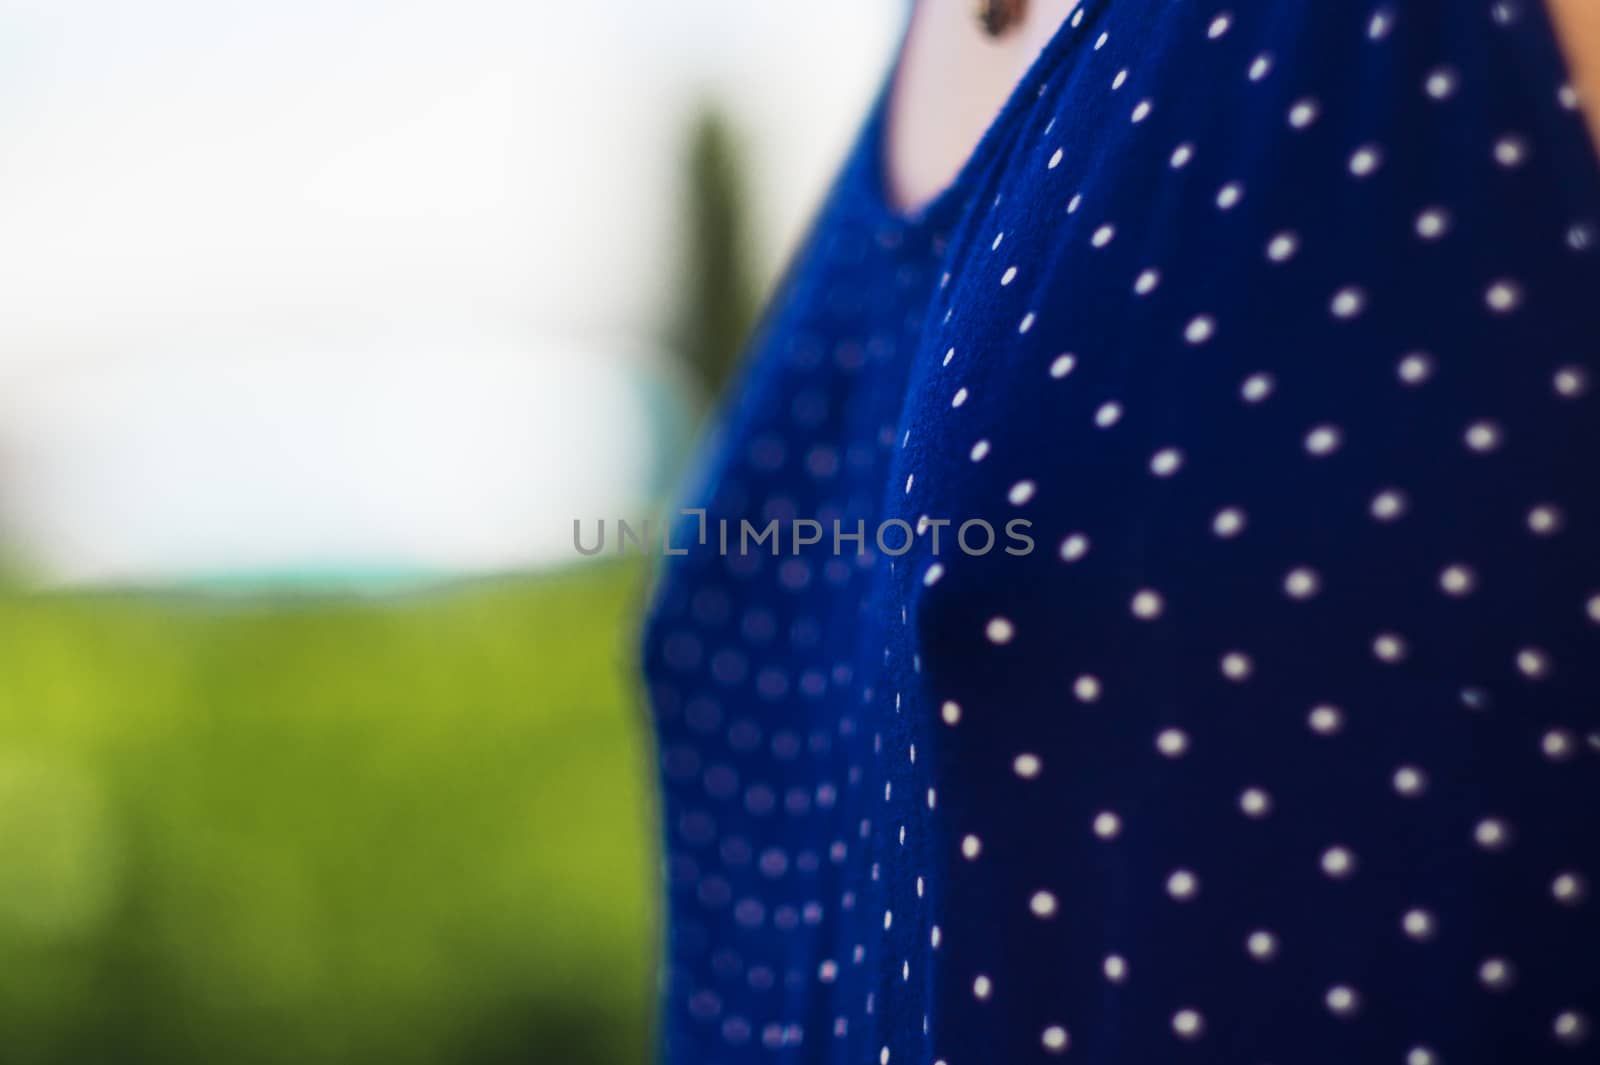 The top of the blue dress in polka dots, at the level of the female breast.